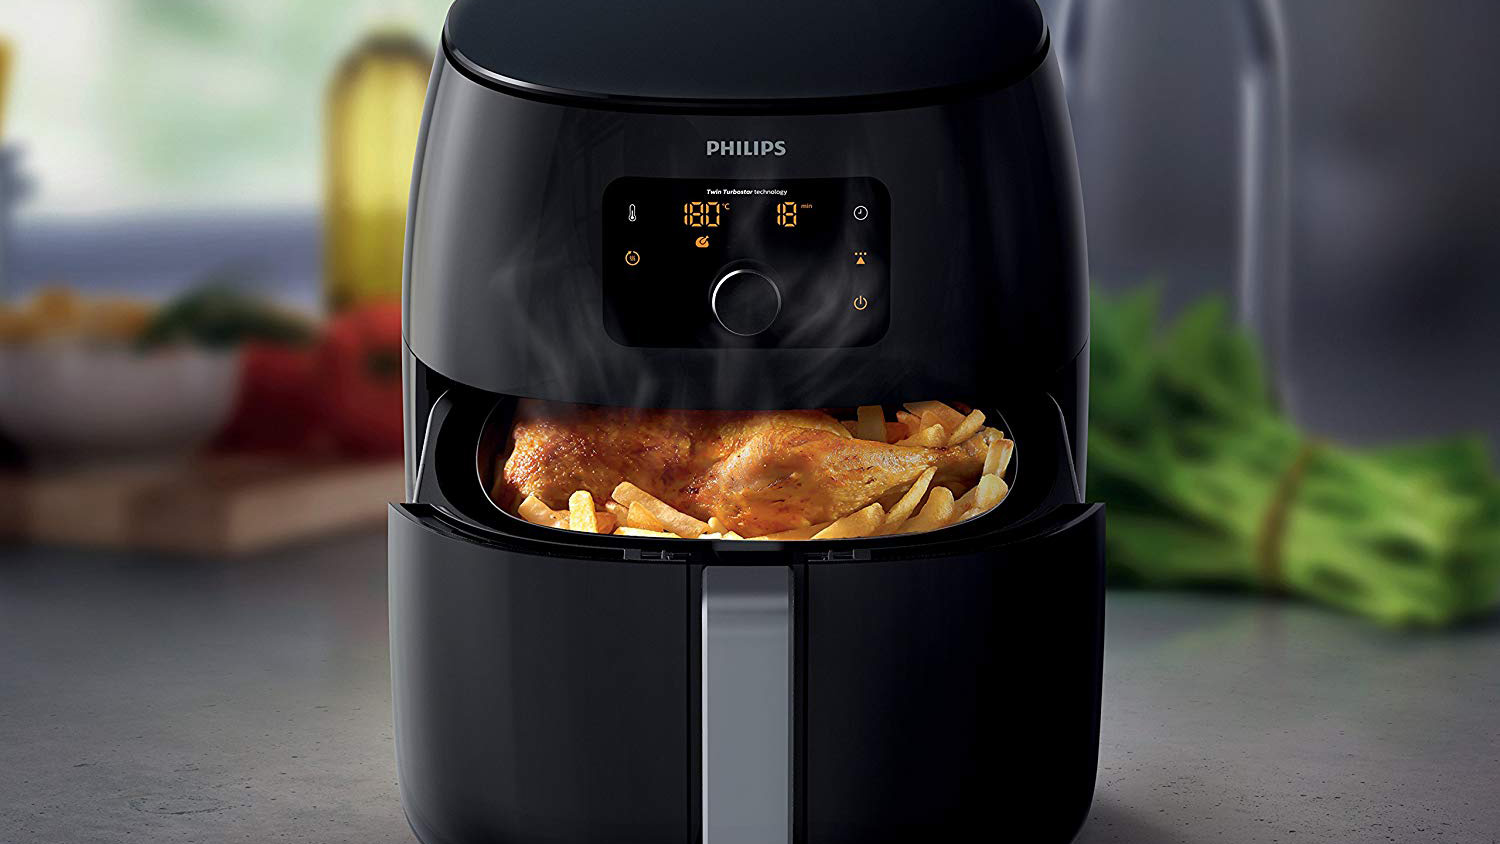 One of the best Airfryer brand so far